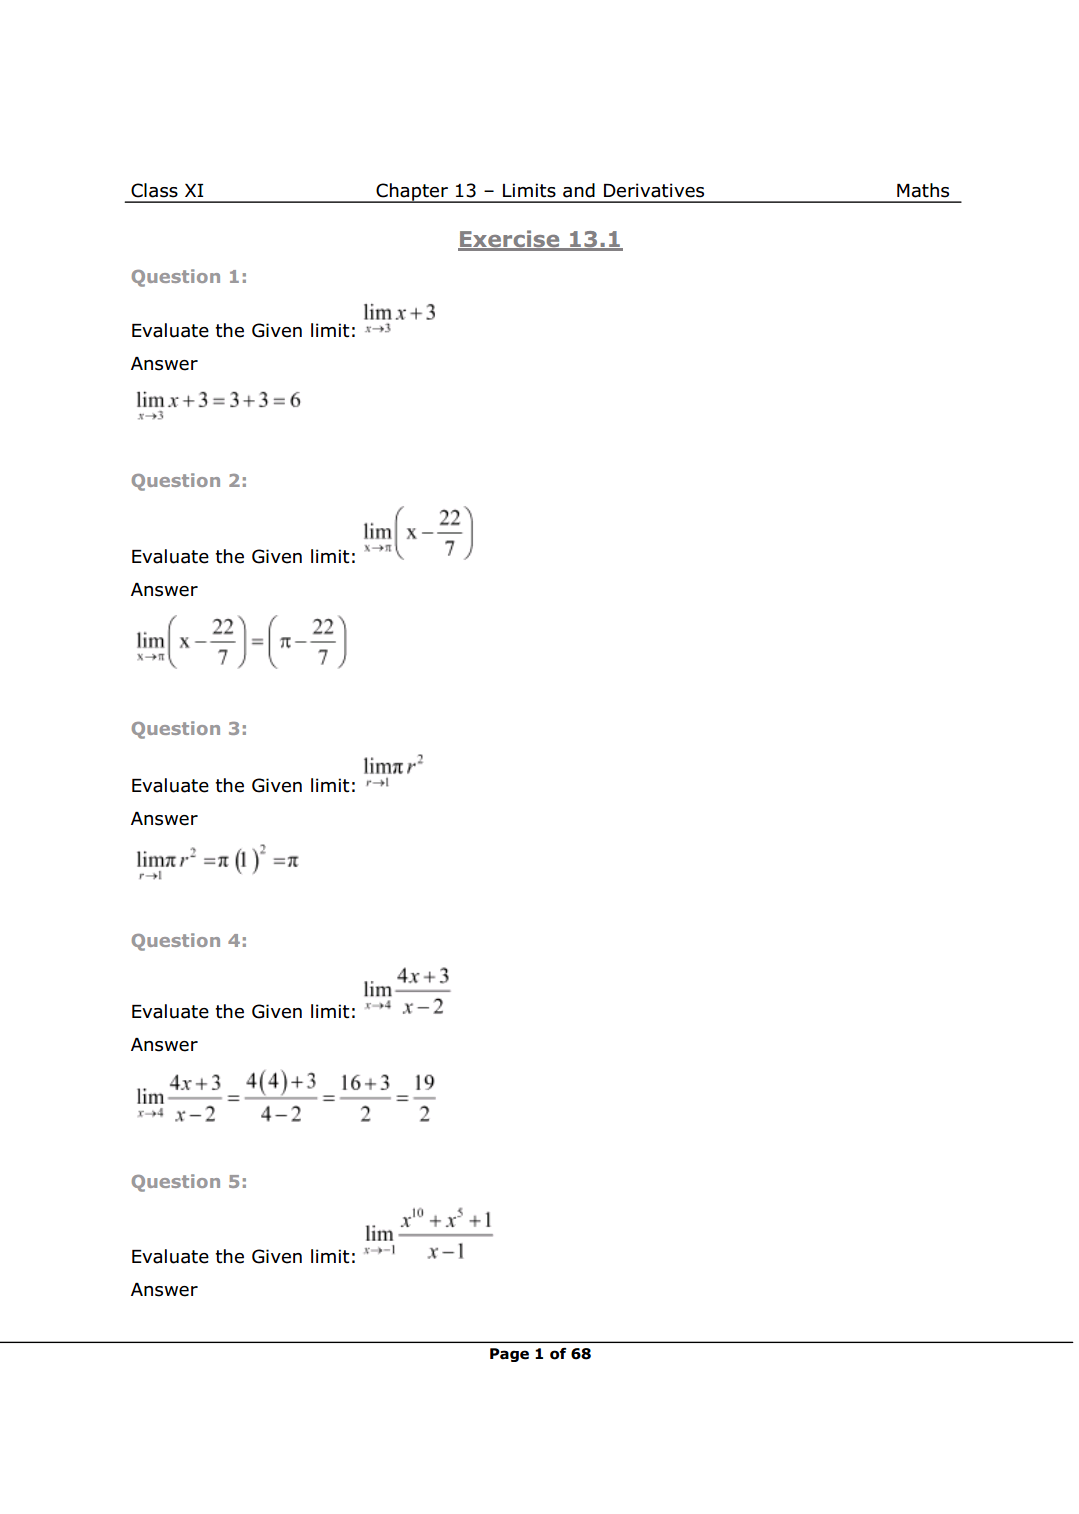 NCERT Class 11 Maths Chapter 13 Exercise 13.1 Solutions image 1